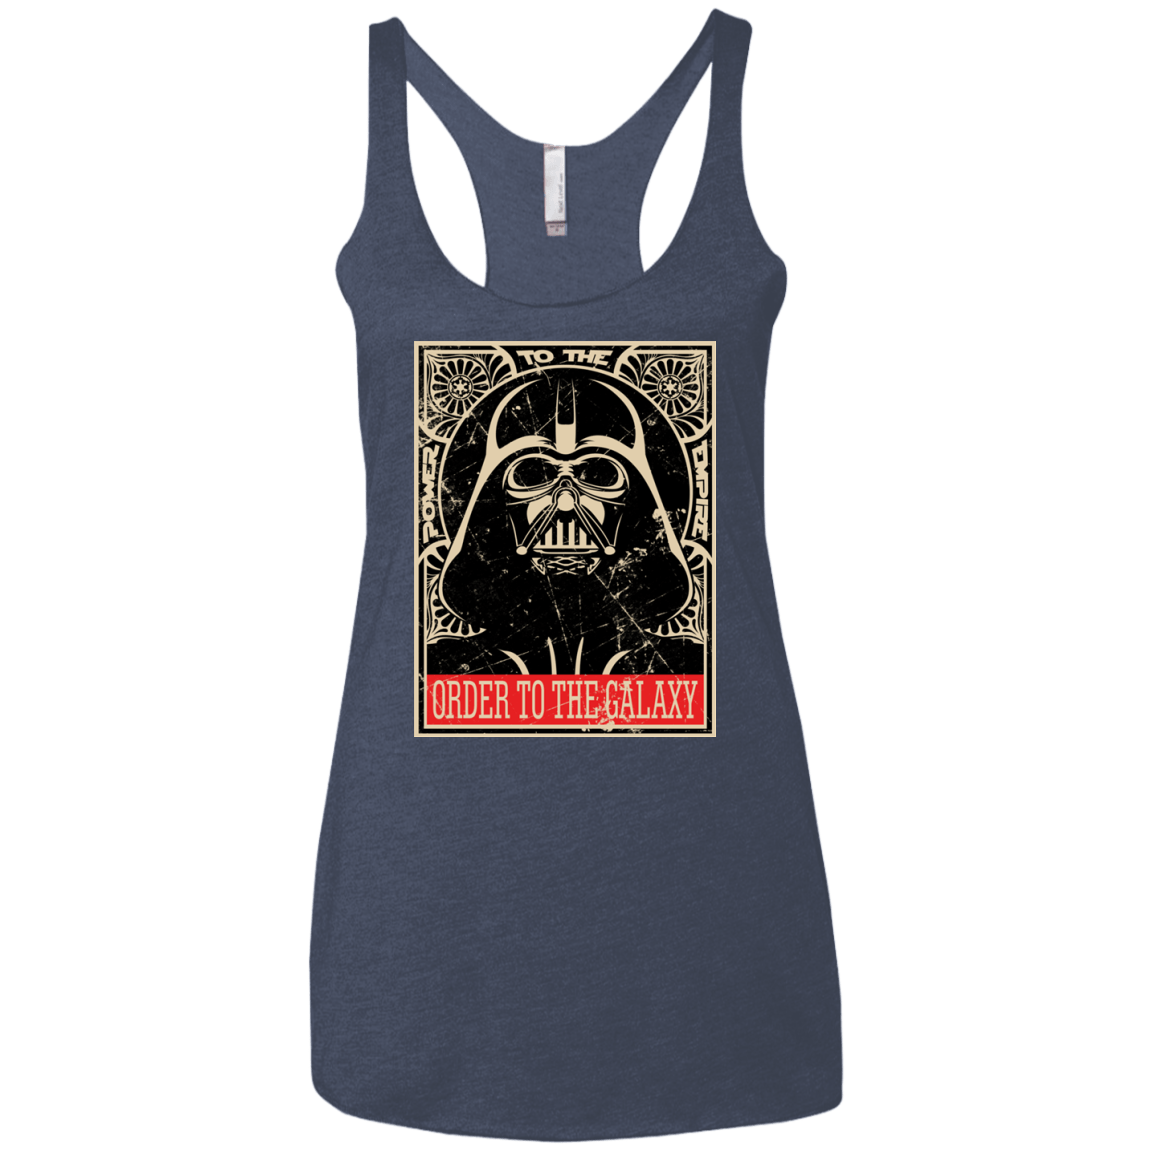 T-Shirts Vintage Navy / X-Small Order to the galaxy Women's Triblend Racerback Tank